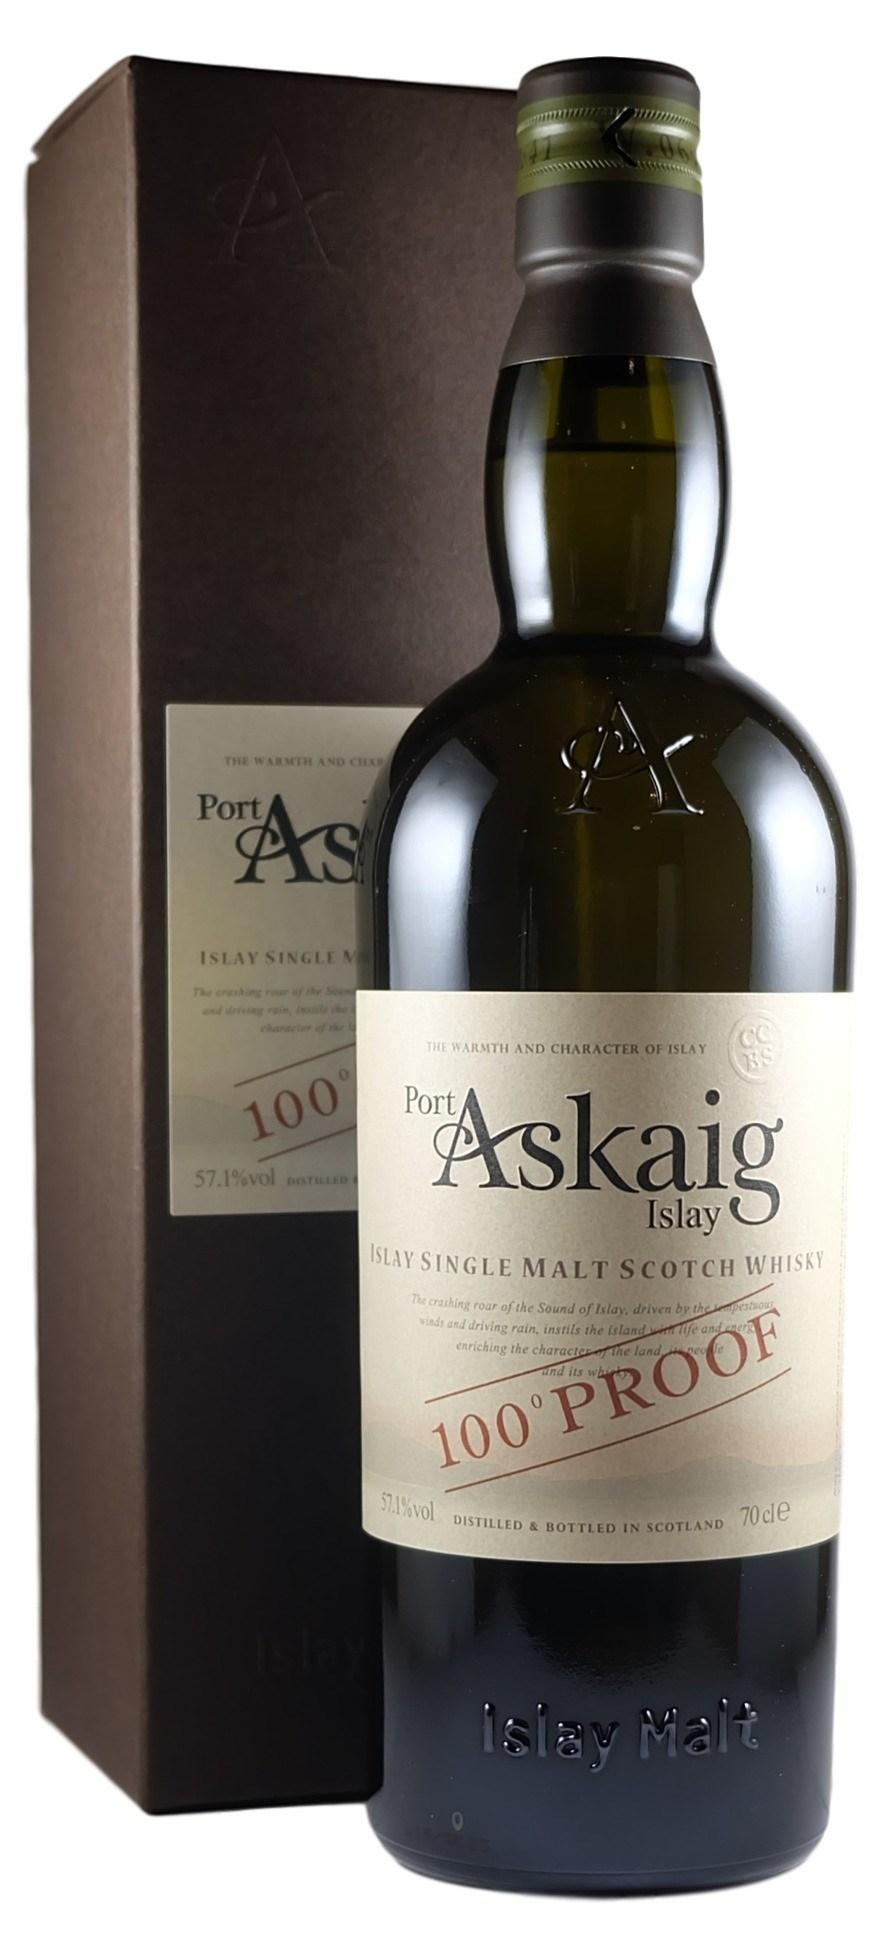 PORT ASKAIG 100 PROOF 57.1% Alc/Vol; Islay Aged in refill American oak, the youngest whisky in Port Askaig 100 proof is seven years old and it is bottled at 100 British proof: 57.1% ABV.